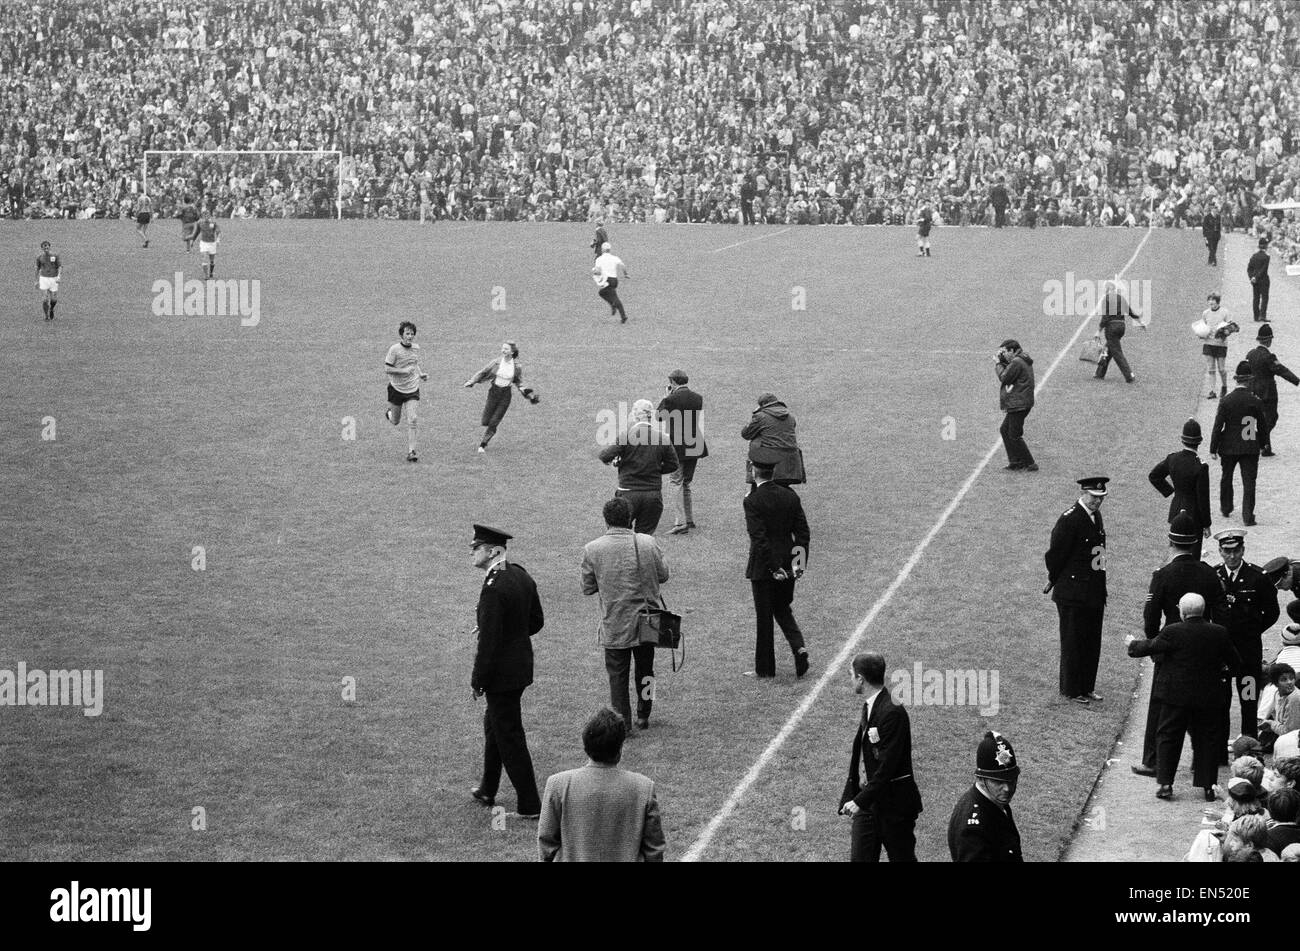 Wolverhampton Wanderers vs. Nottingham Forest. Peter Knowles runs off the pitch to avoid fans, he left football to become a Jehovah's Witness. 8th October 1969 Stock Photo